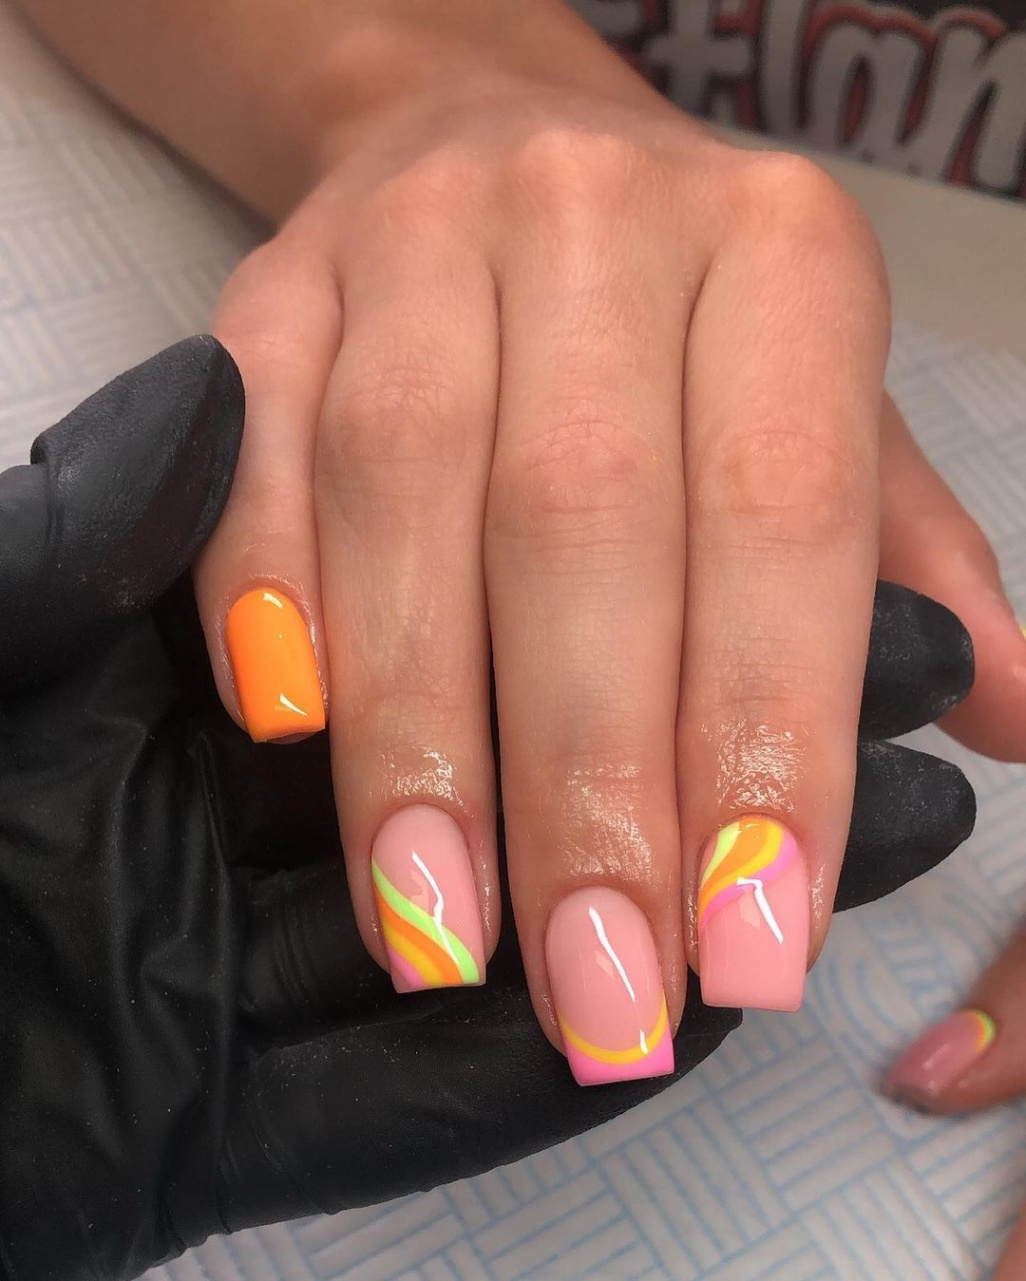 𝐊𝐀𝐃𝐈𝐂𝐄 on Instagram: “Holiday nails 😍🫶🌞🍭💕 Biab on